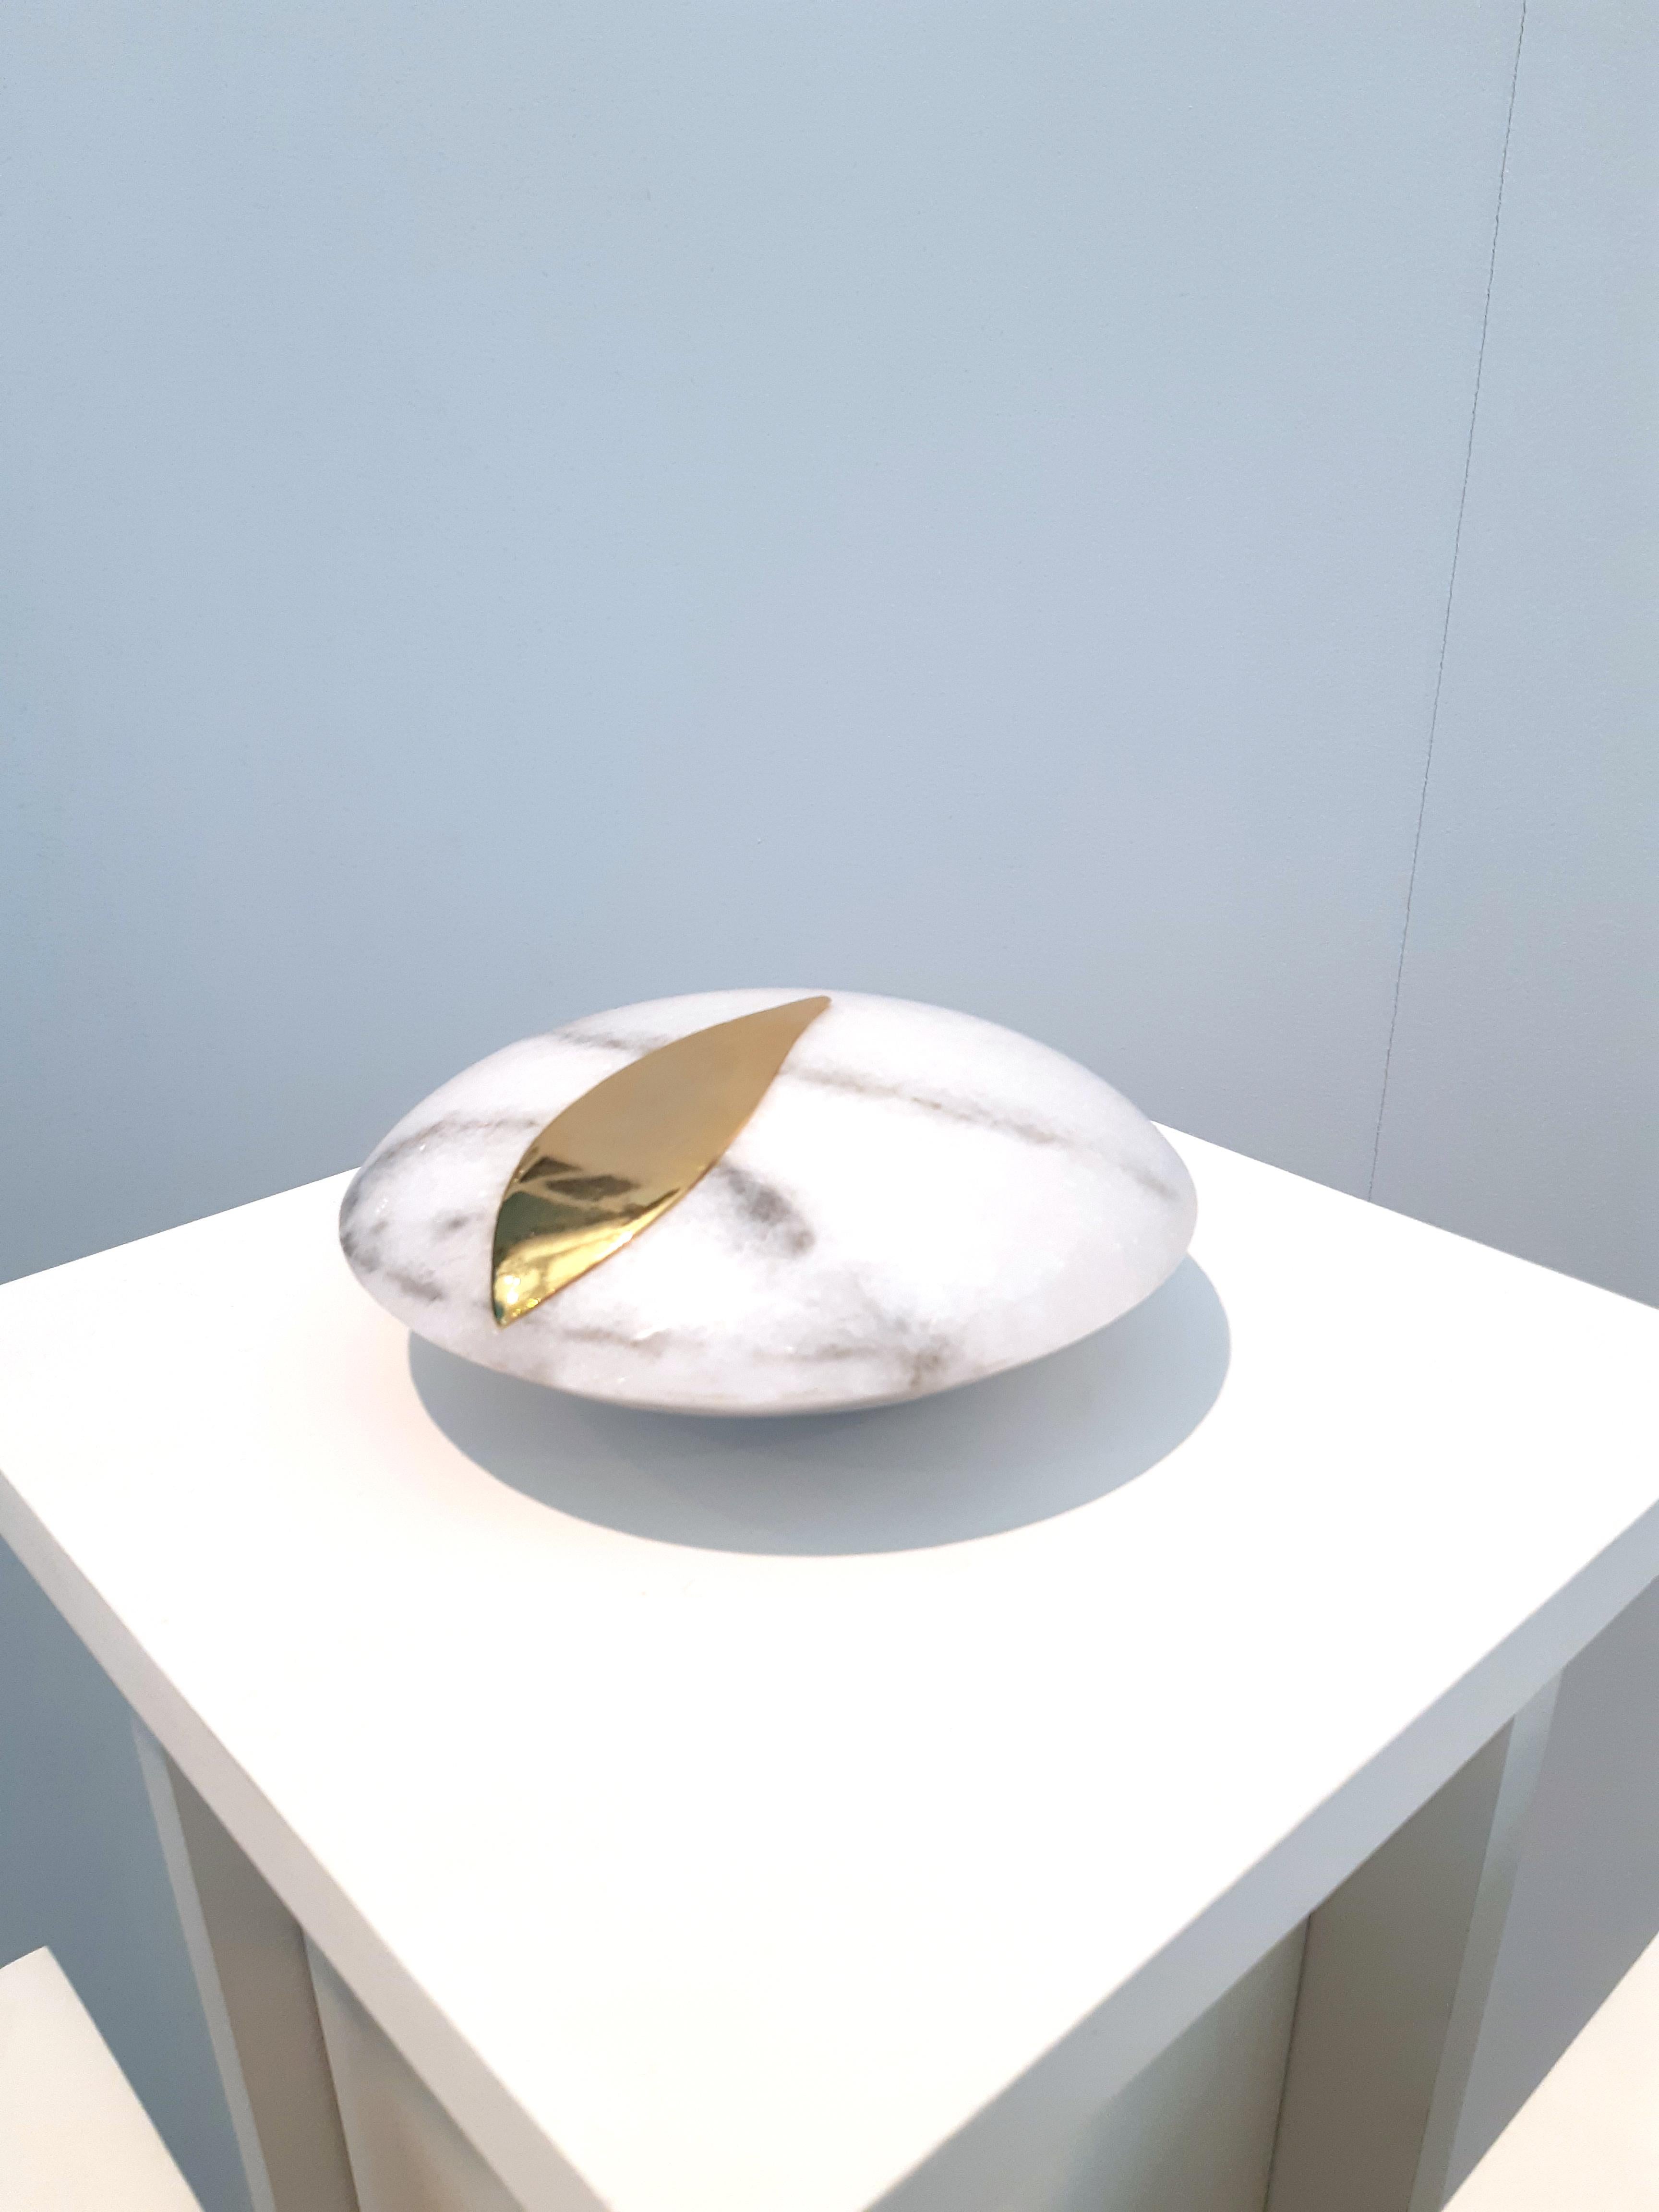 Libidonoso object #1 by Mameluca
Material: marble, gold-plated metal
Dimensions: D 15x H 5.5 cm

In reference to Paul Nacke’s states about Narcissism, being an attitude of a person who treats his own body in the same way as the body of a sexual